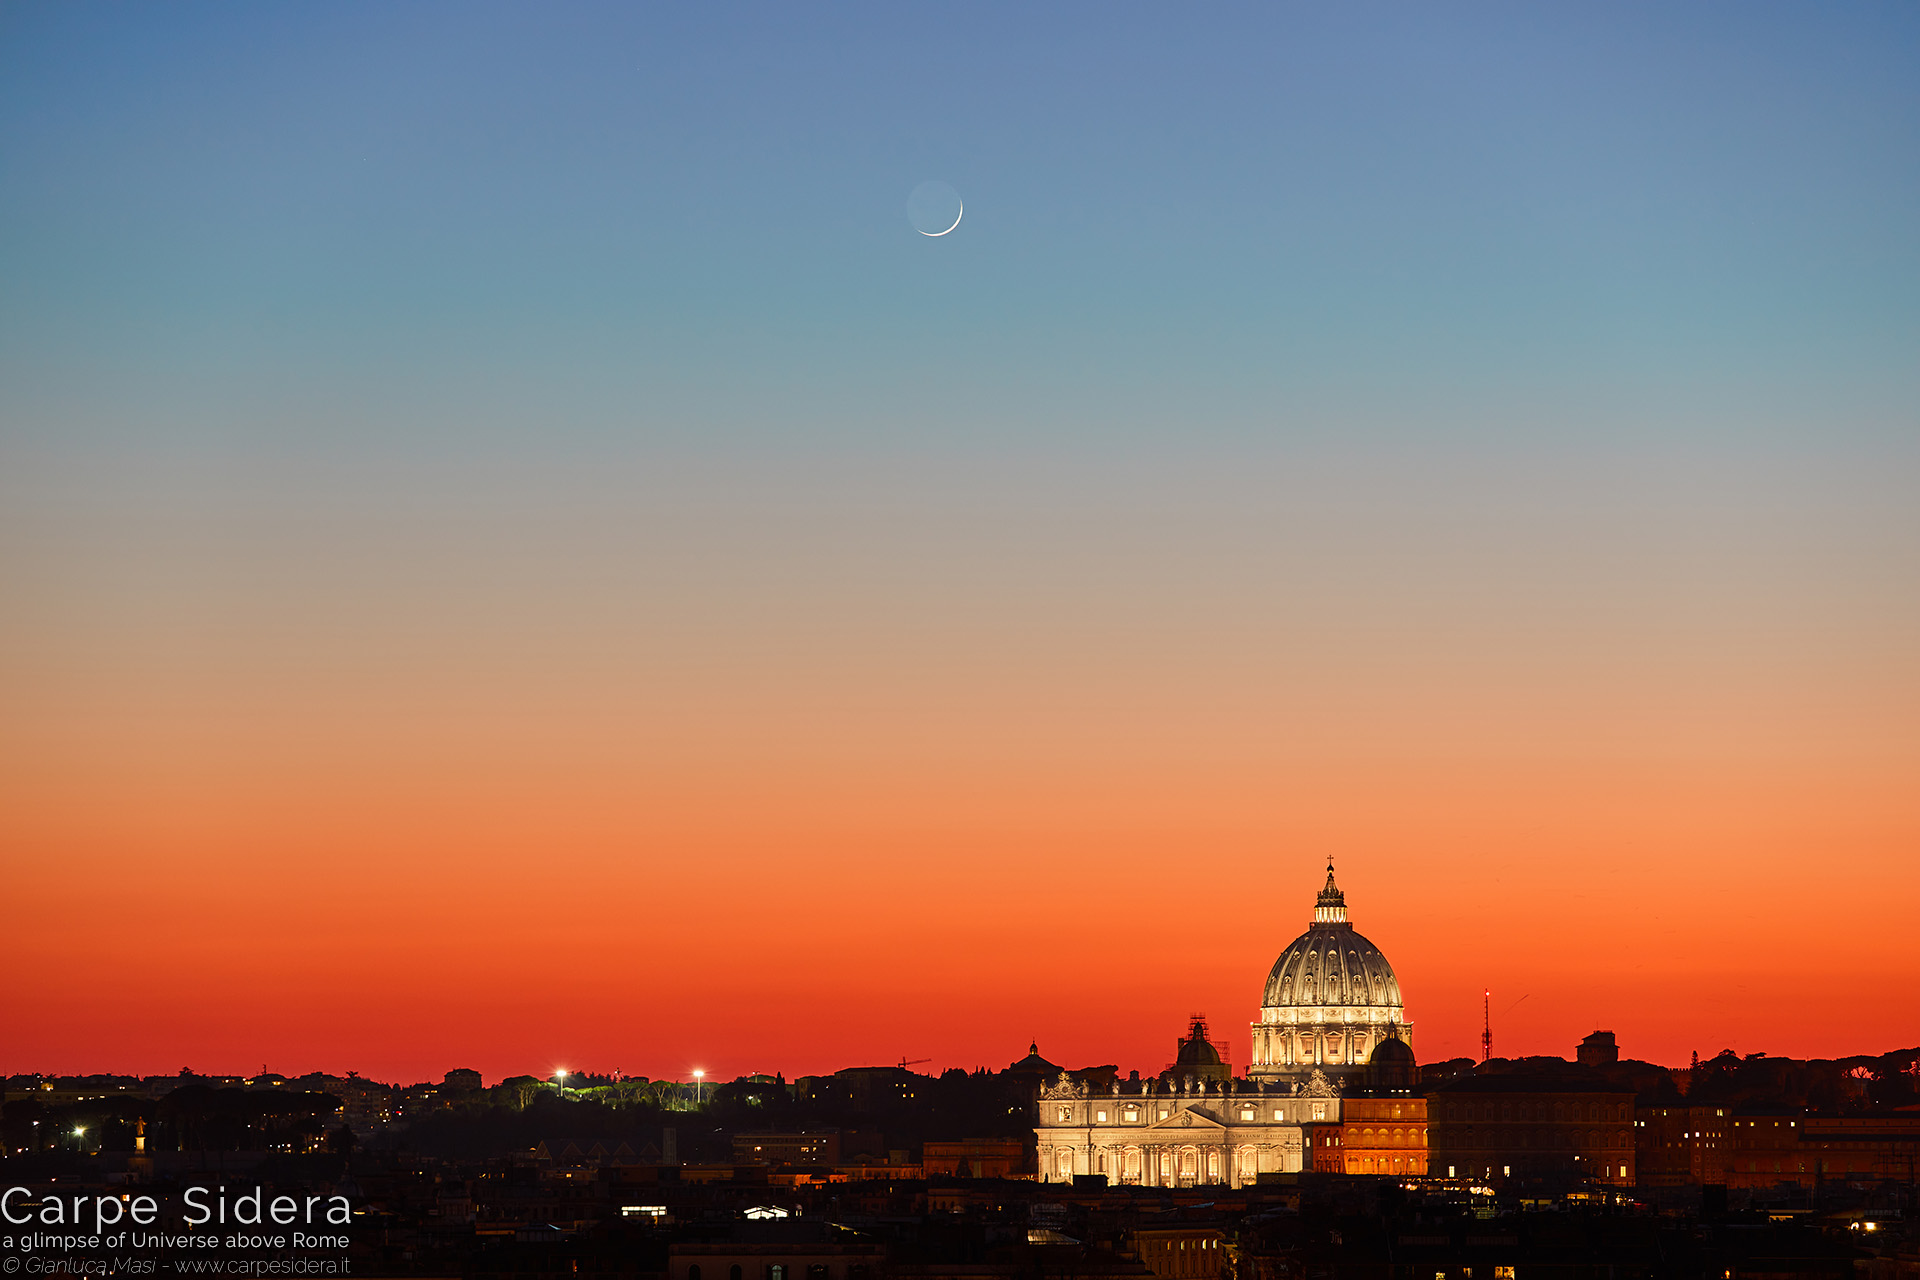 16. A sharp Moon crescent shines above the dome of St. Peter's, at sunset.